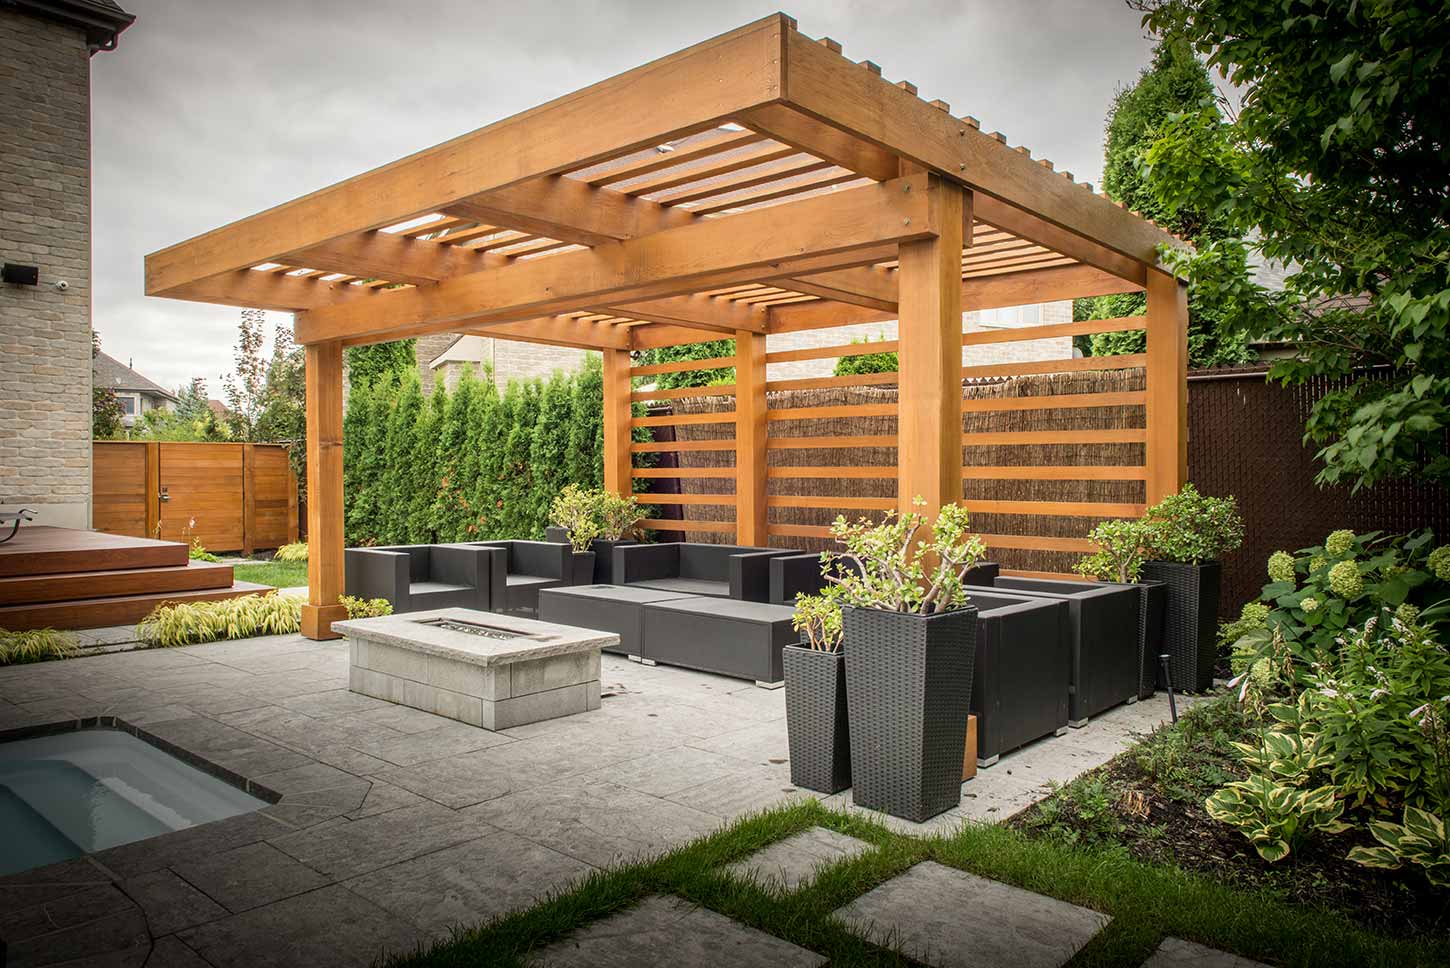 Beautify Your Home with Pergolas under Budget